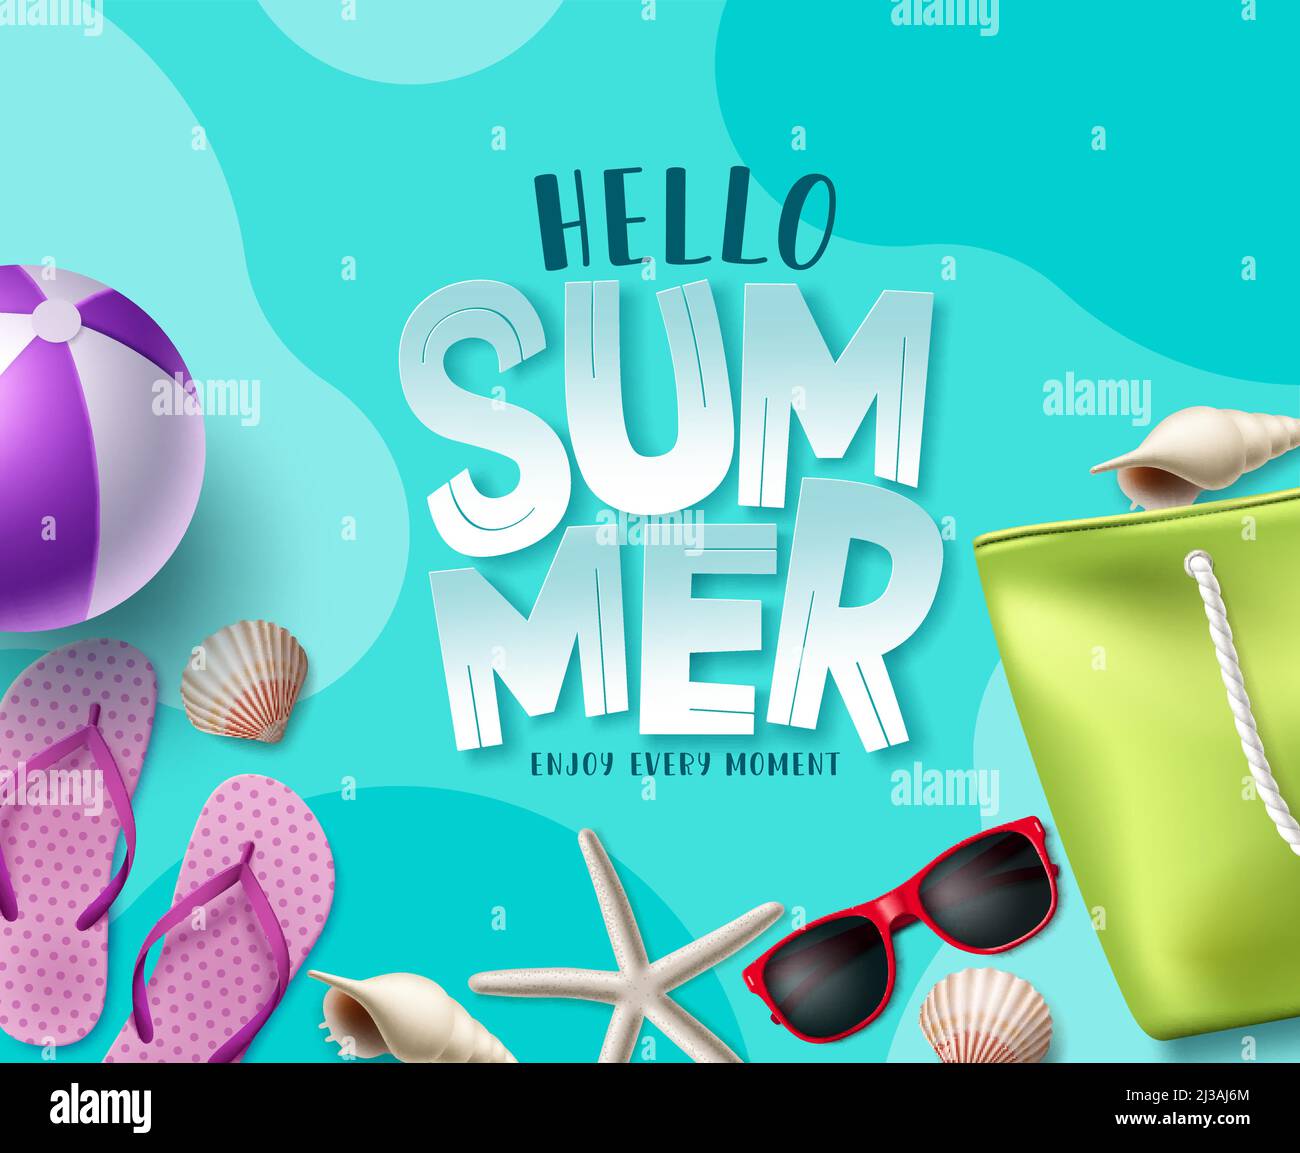 Summer vector background design. Hello summer greeting text with beach elements for tropical holiday season banner design. Vector illustration. Stock Vector